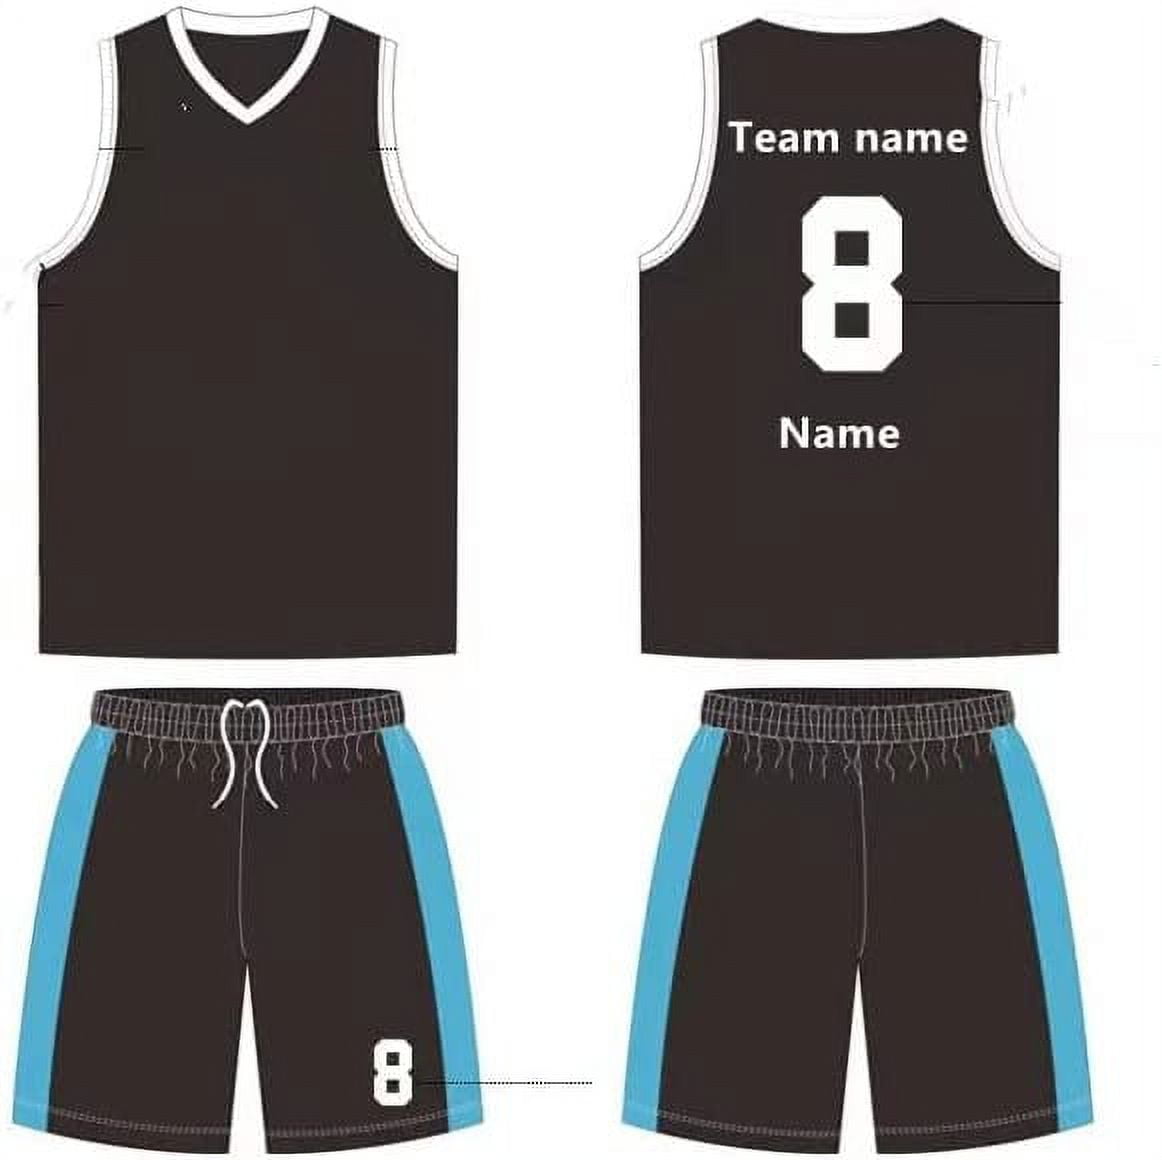  Custom Basketball Outfits Personalized Printed Name and Numbers  Breathable Quick-Dry Sports Jersey for Men/Kid, Black Red25, One Size 